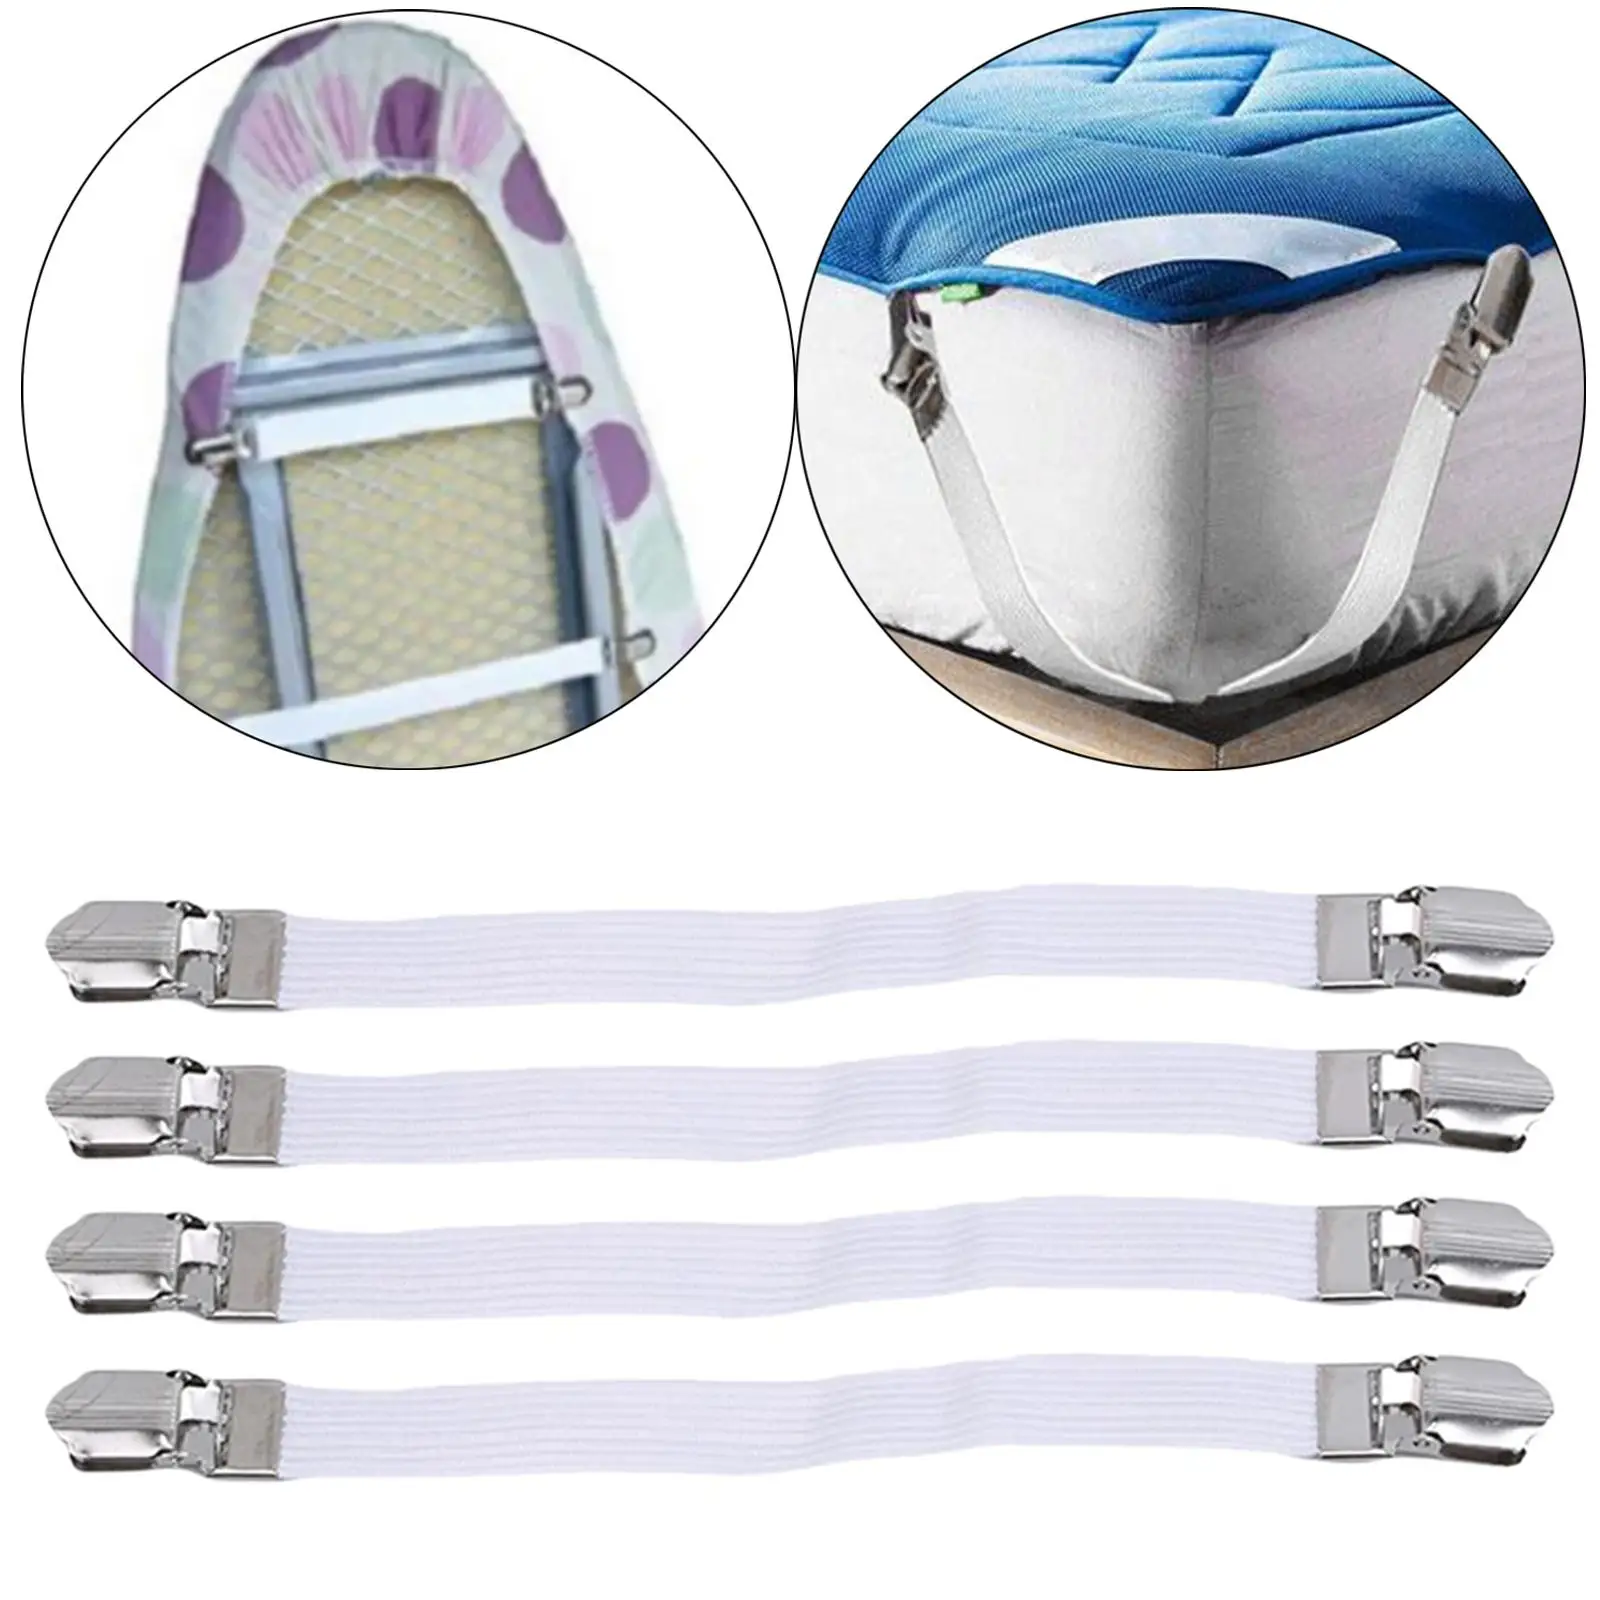 4x Ironing Board Cover Fasteners Straps Clips Bed Sheet Fasteners Adjustable Non Slip Corner Holder Gripper for Mattress